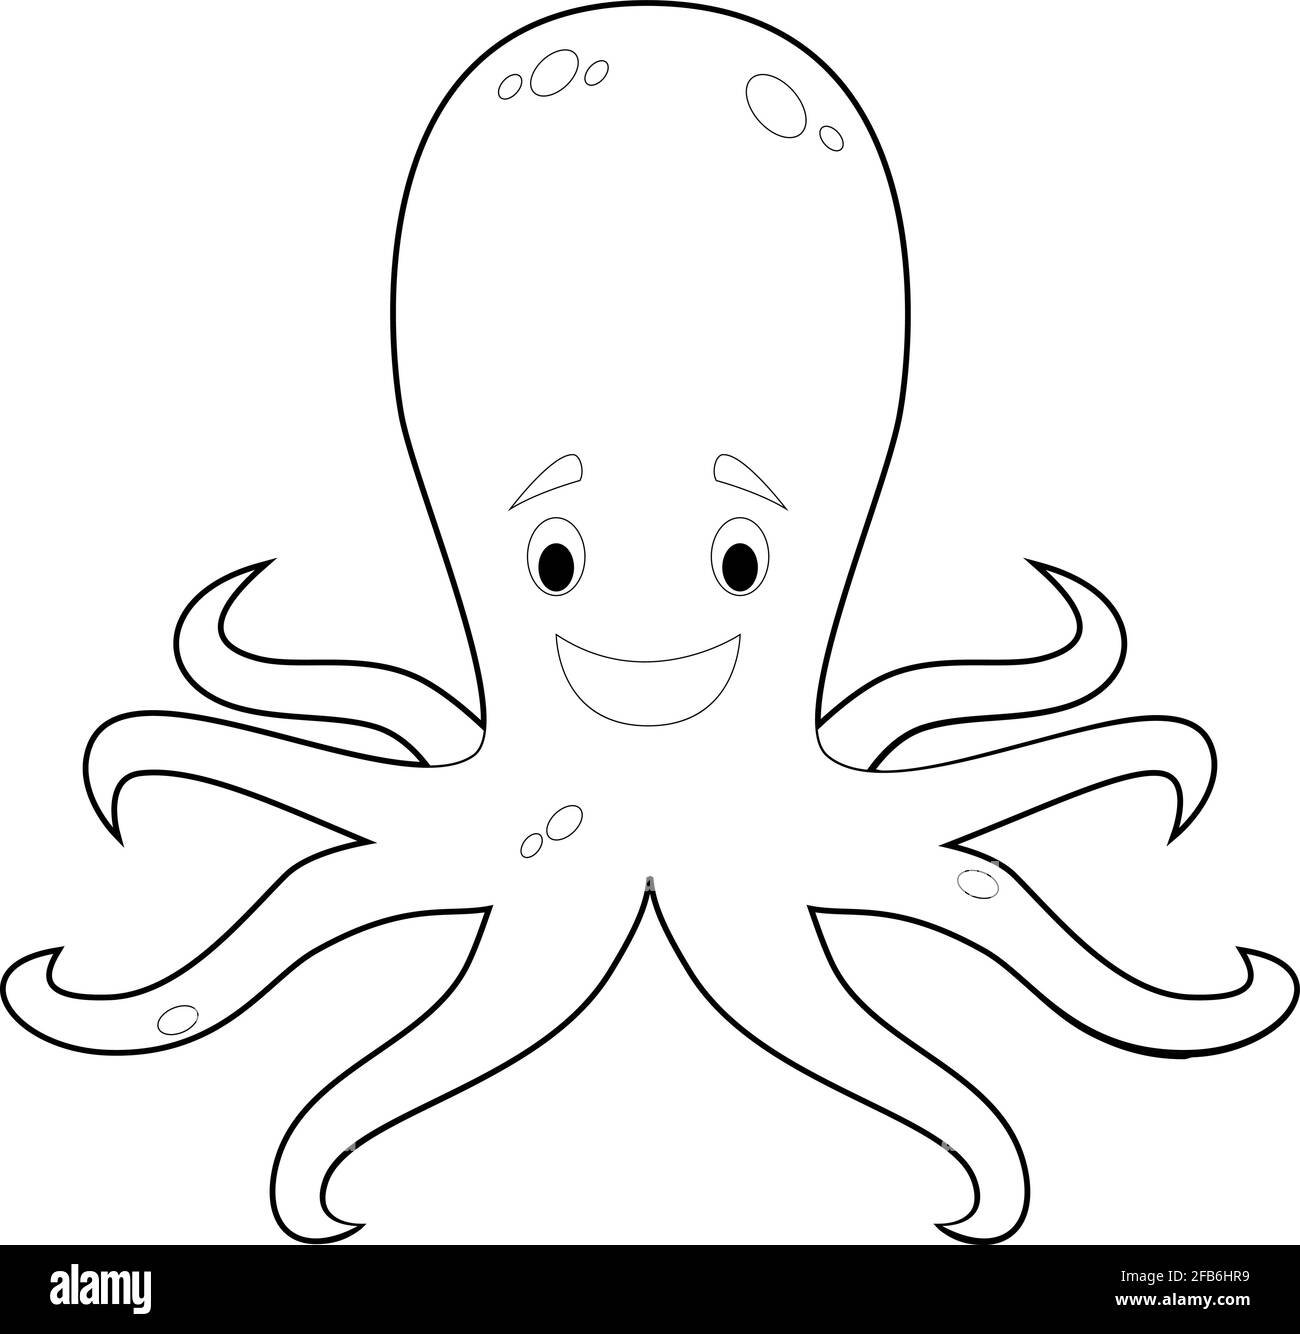 Easy Coloring drawings of animals for little kids: Octopus Stock ...